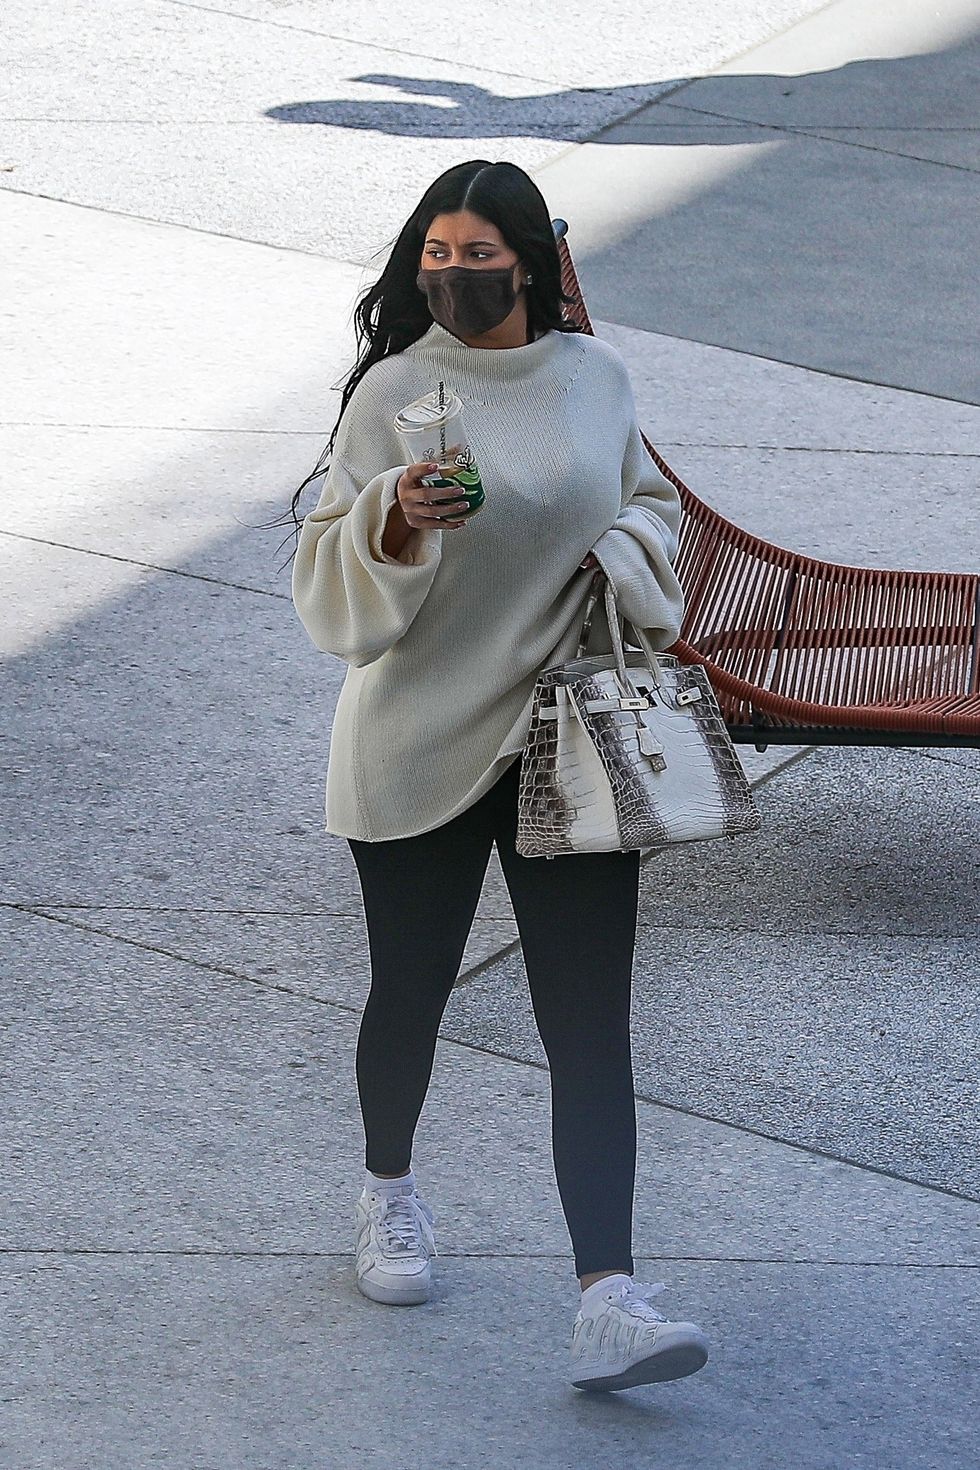 Kylie Jenner Spottted Out in LA After Welcoming Baby - Kylie